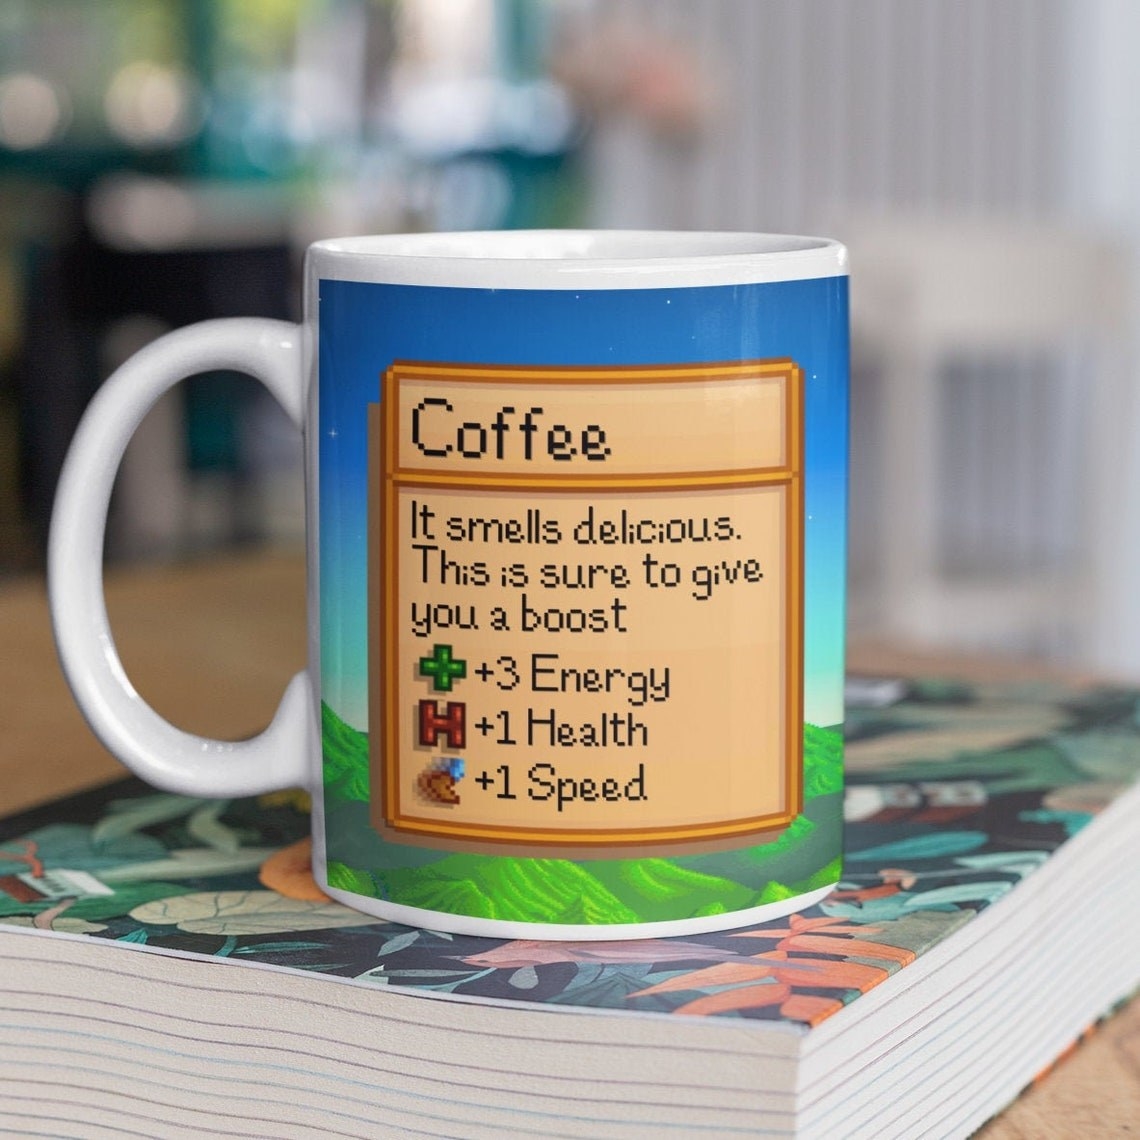 mug that says coffee with description that says it gives +3 energy +1 health and +1 speed